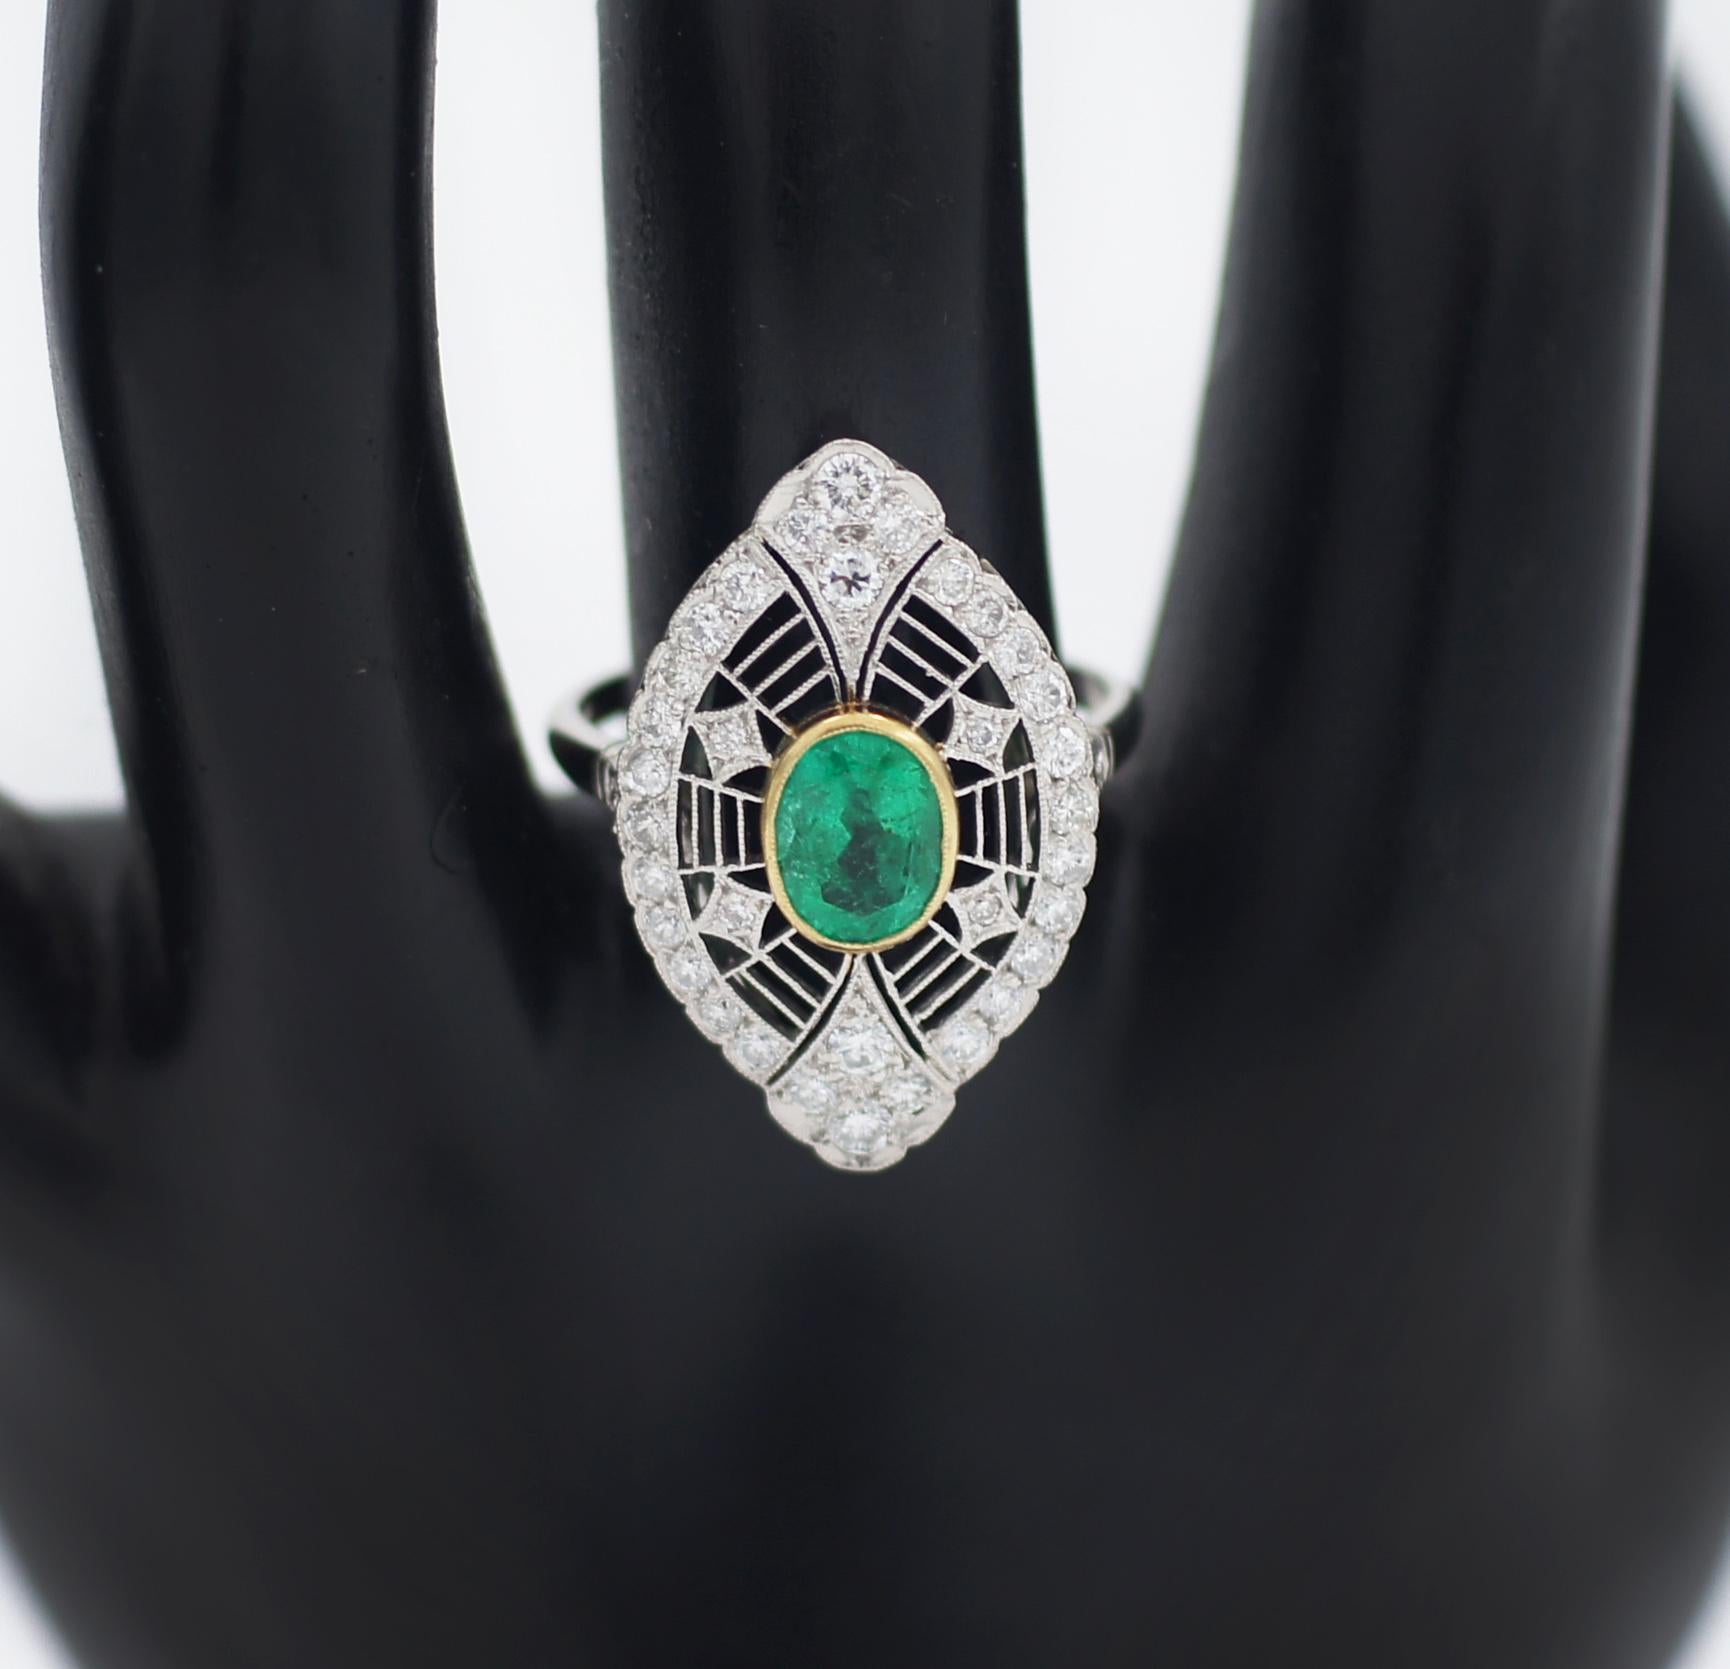 Vintage Art Deco Filigree Platinum Diamond and Emerald Necklace and Ring Set For Sale 2